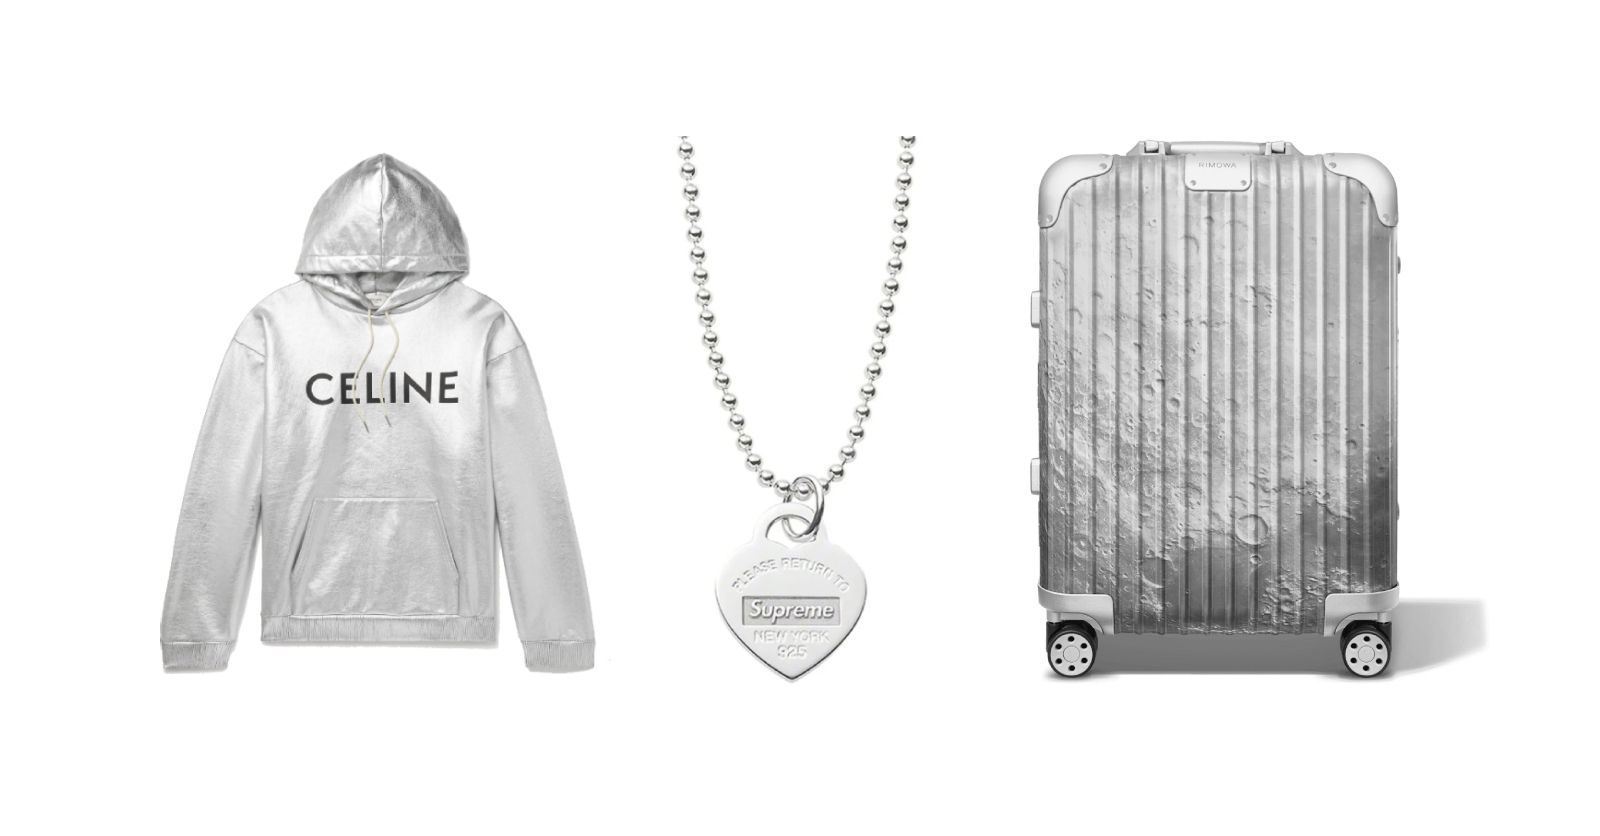 Sparkling Christmas gift ideas for him and her this holiday